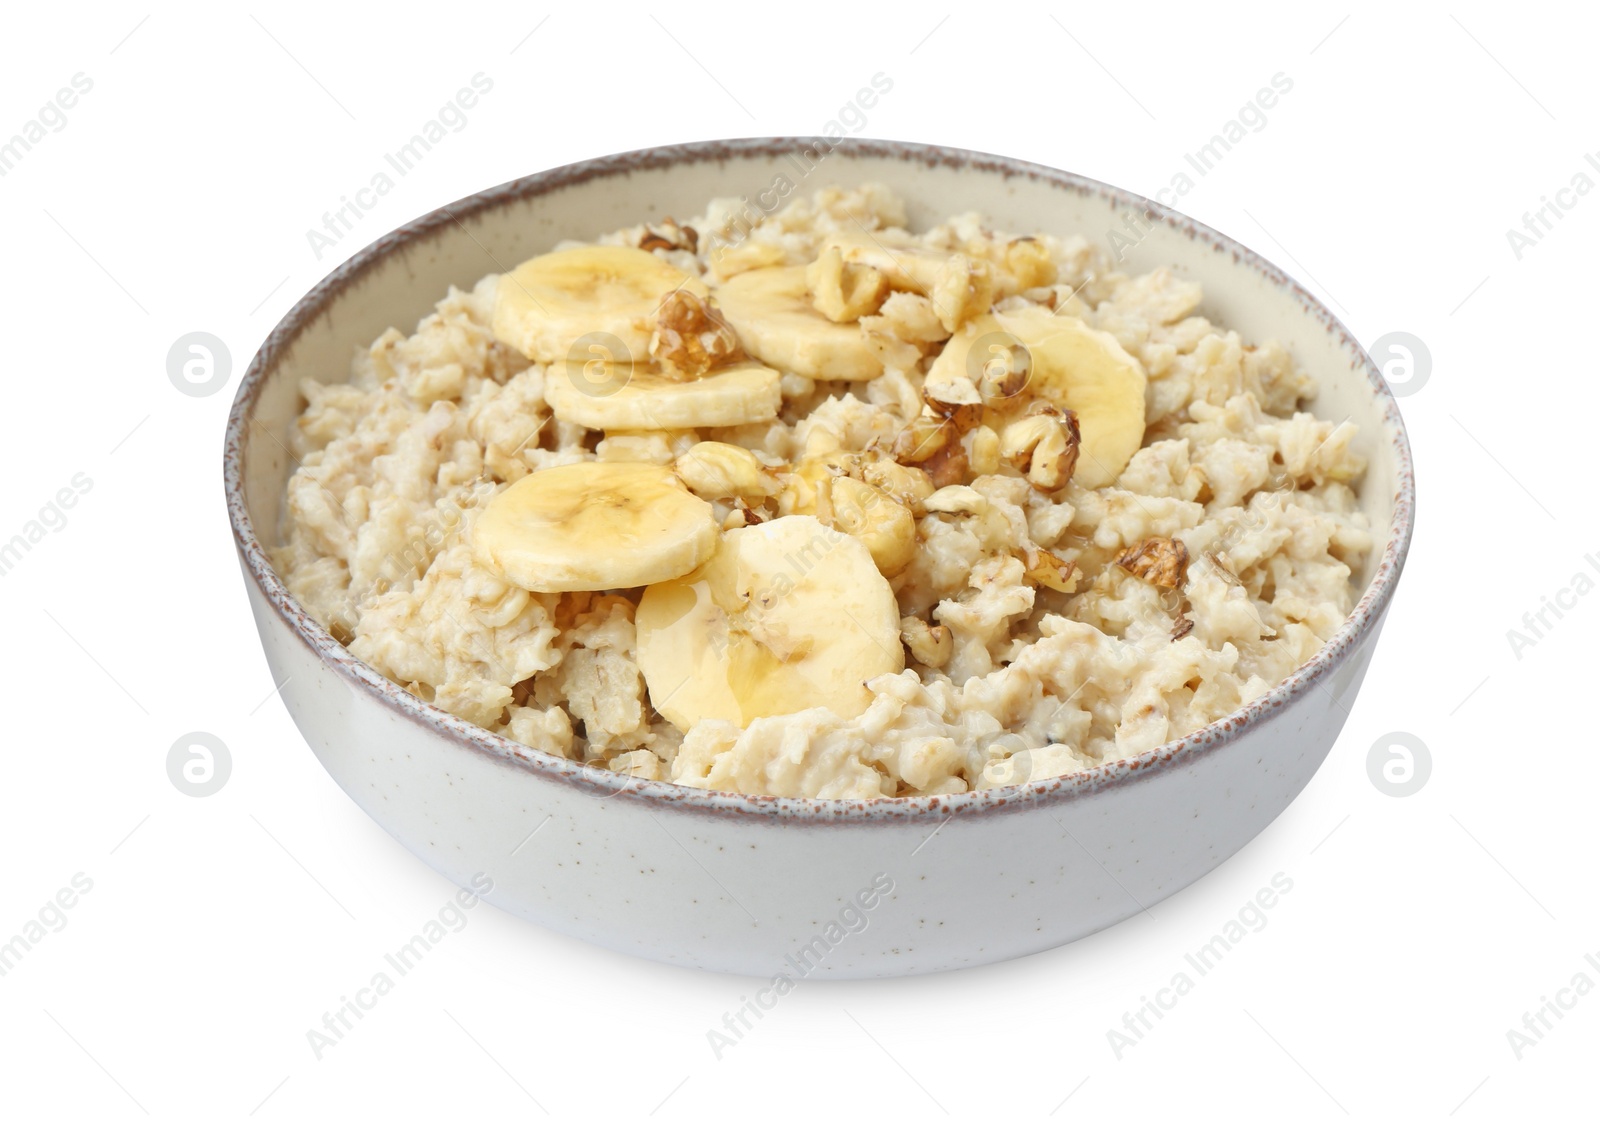 Photo of Tasty oatmeal with banana and walnuts in bowl isolated on white